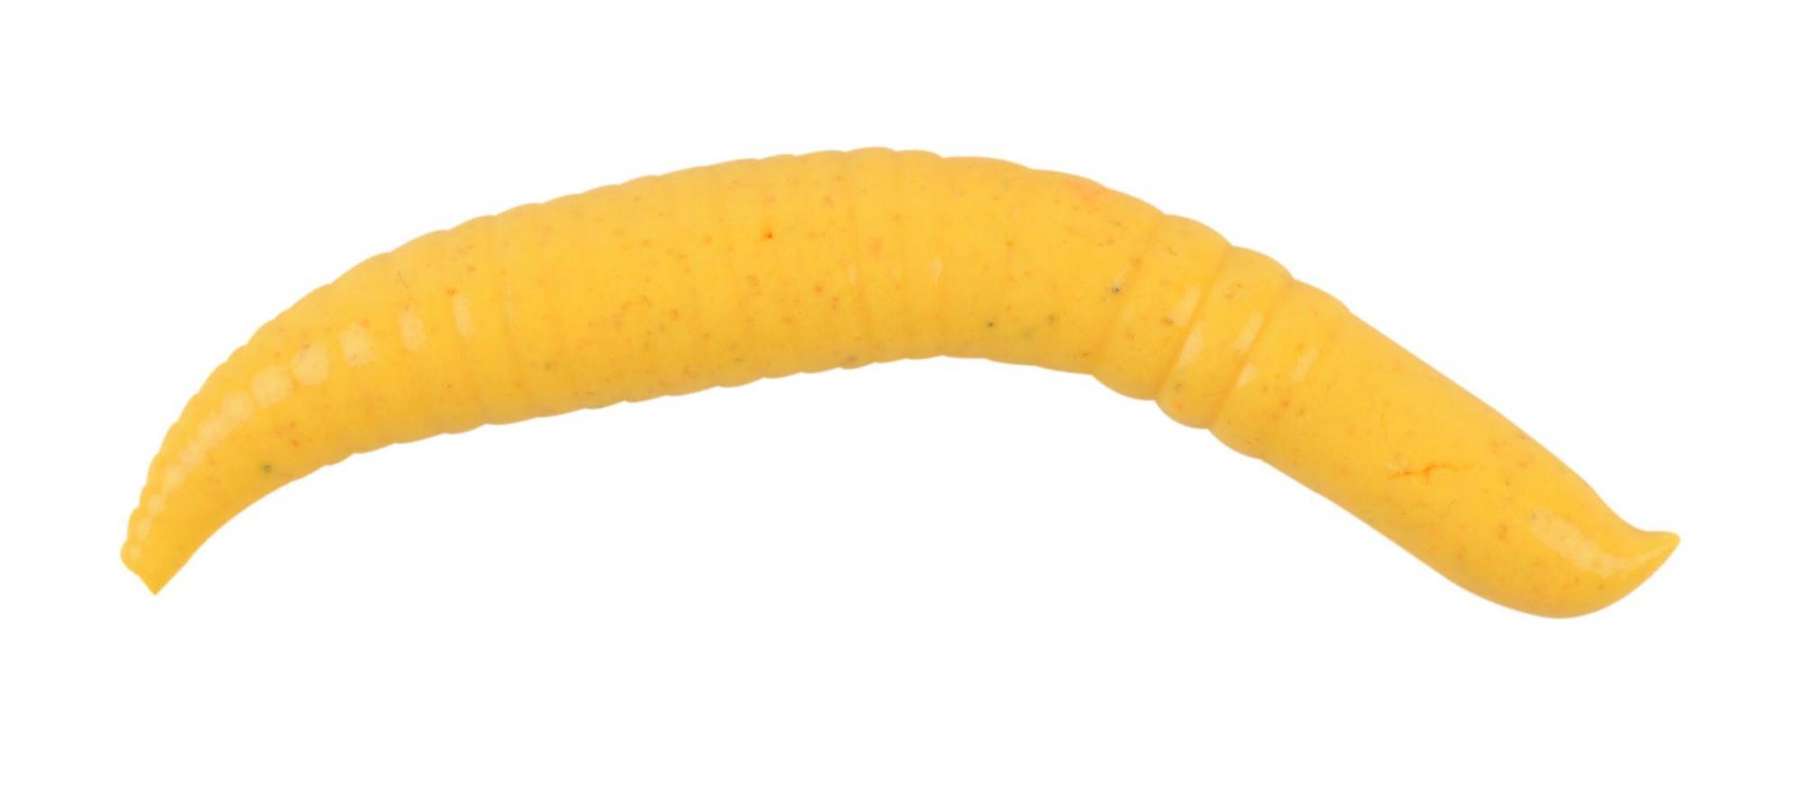 Berkley Gulp Non-floating Pinched Crawler Bait (chunky Cheese, 2-inch) - Gp  2' P at OutdoorShopping